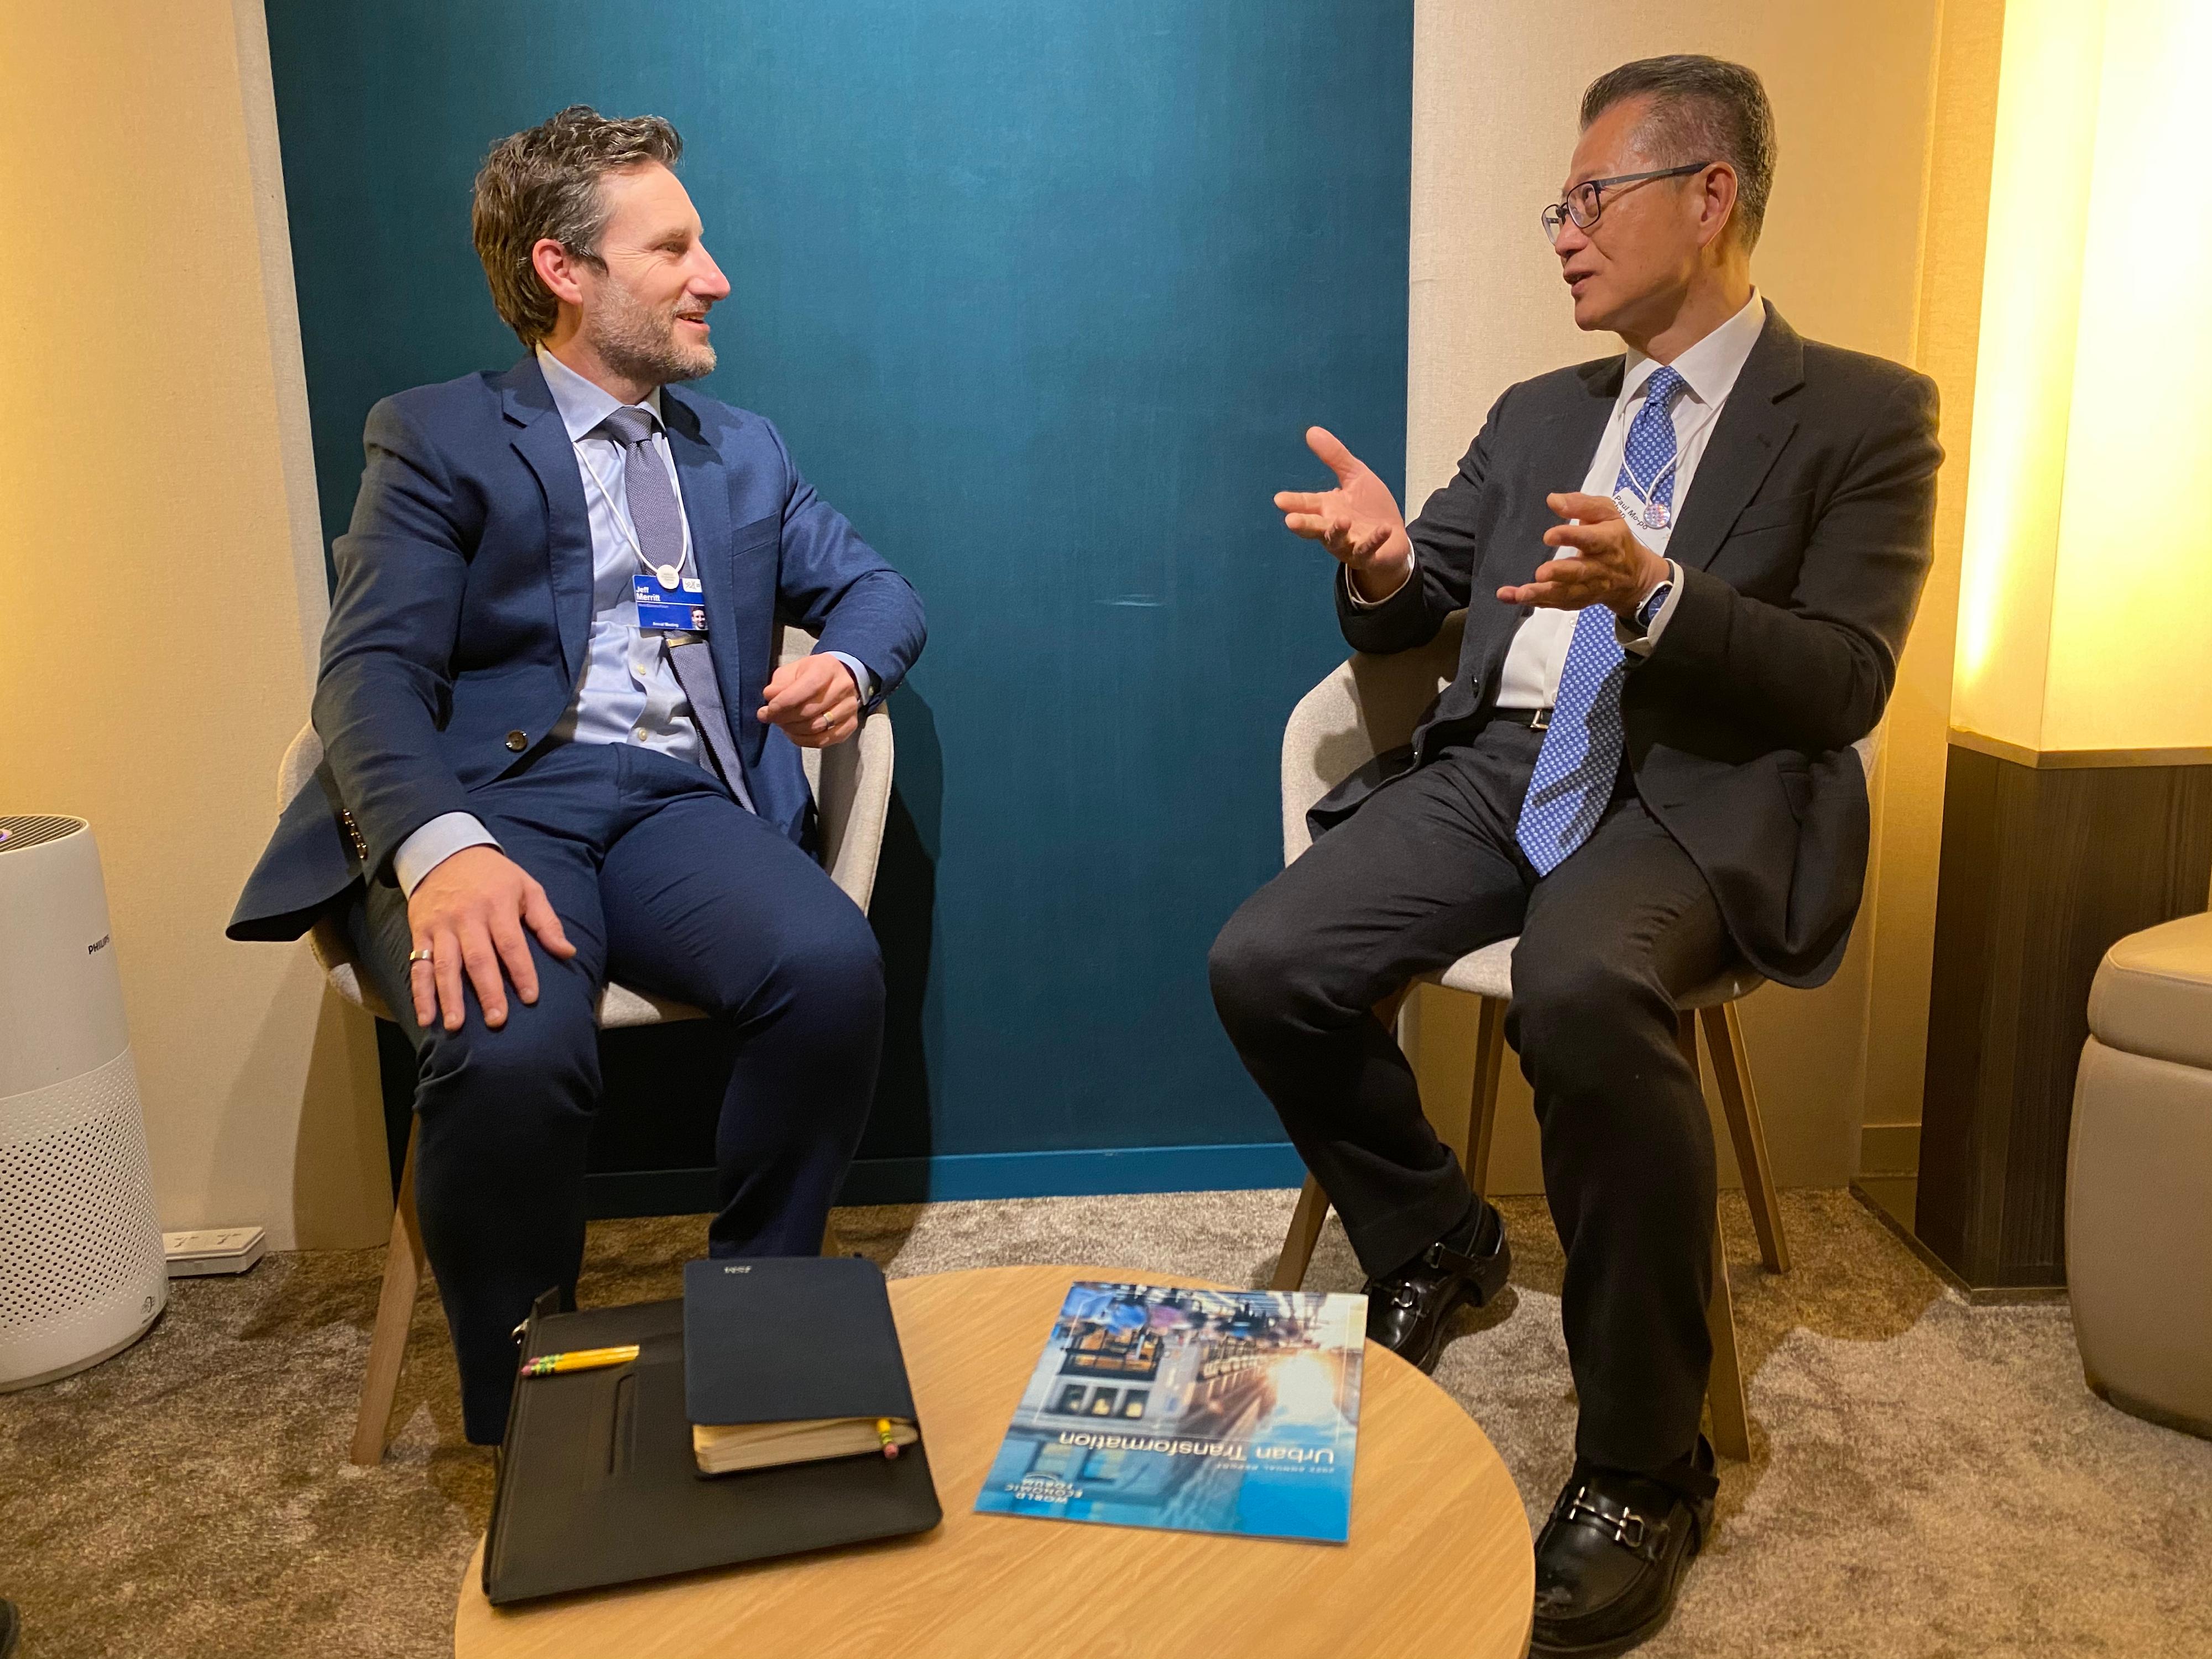 The Financial Secretary, Mr Paul Chan, made his third day of visit to Davos at the World Economic Forum Annual Meeting (January 18, Davos time). Photo shows the Financial Secretary, Mr Paul Chan (right), meeting with the member of the World Economic Forum Executive Committee and Head of Internet of Things and Urban Transformation Platform, Mr Jeff Merritt (left).